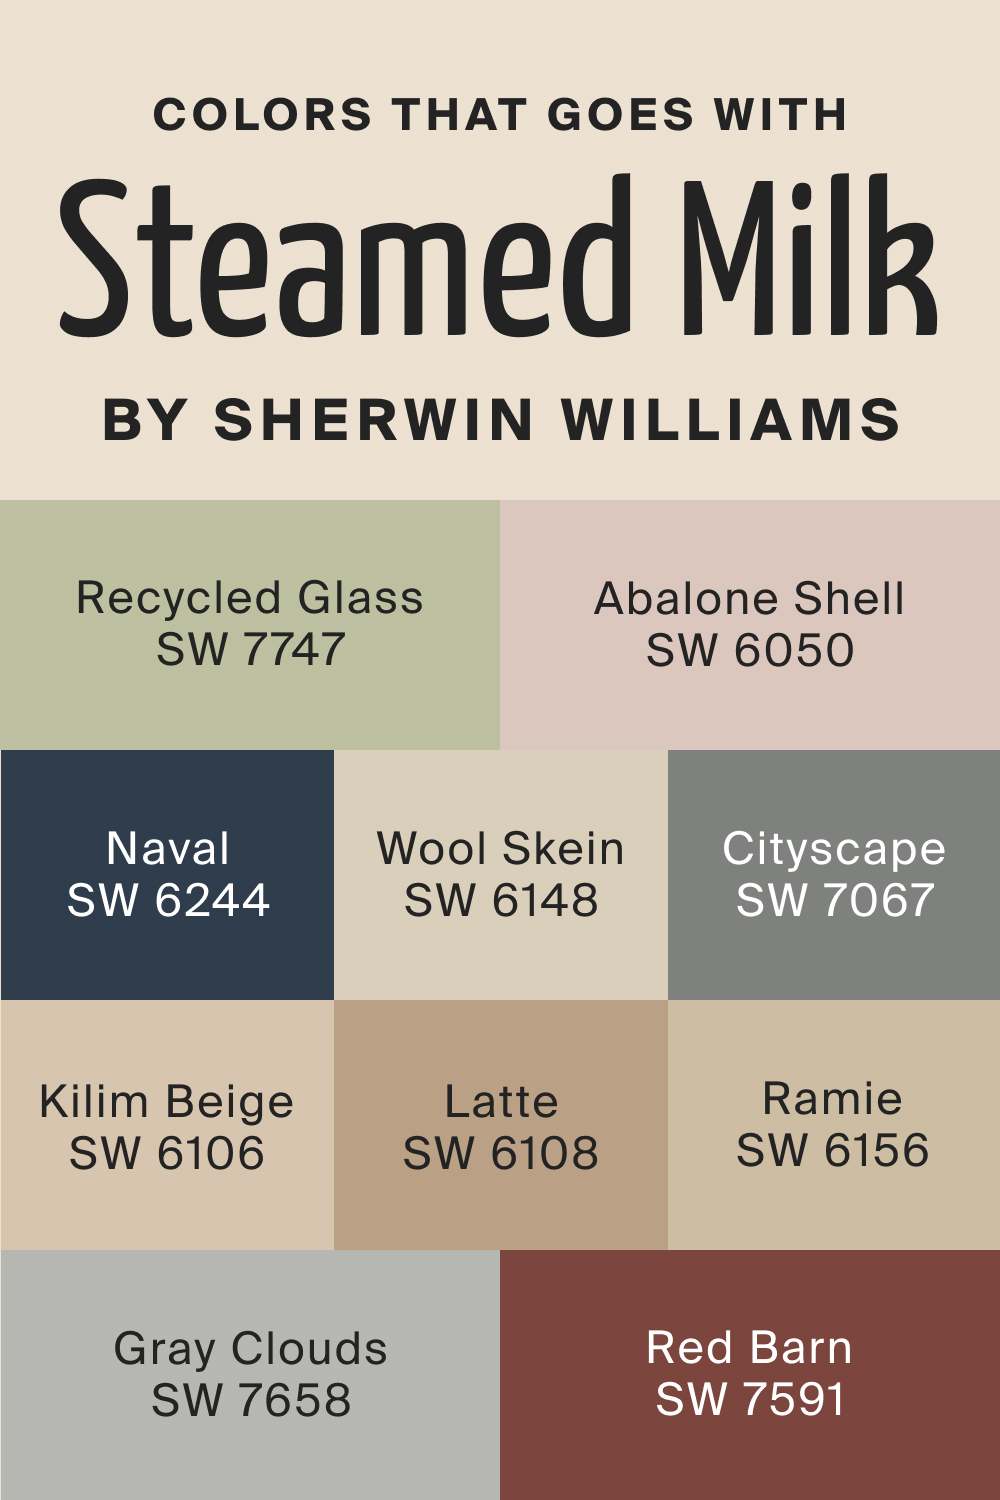 Colors that goes with SW Steamed Milk by Sherwin Williams